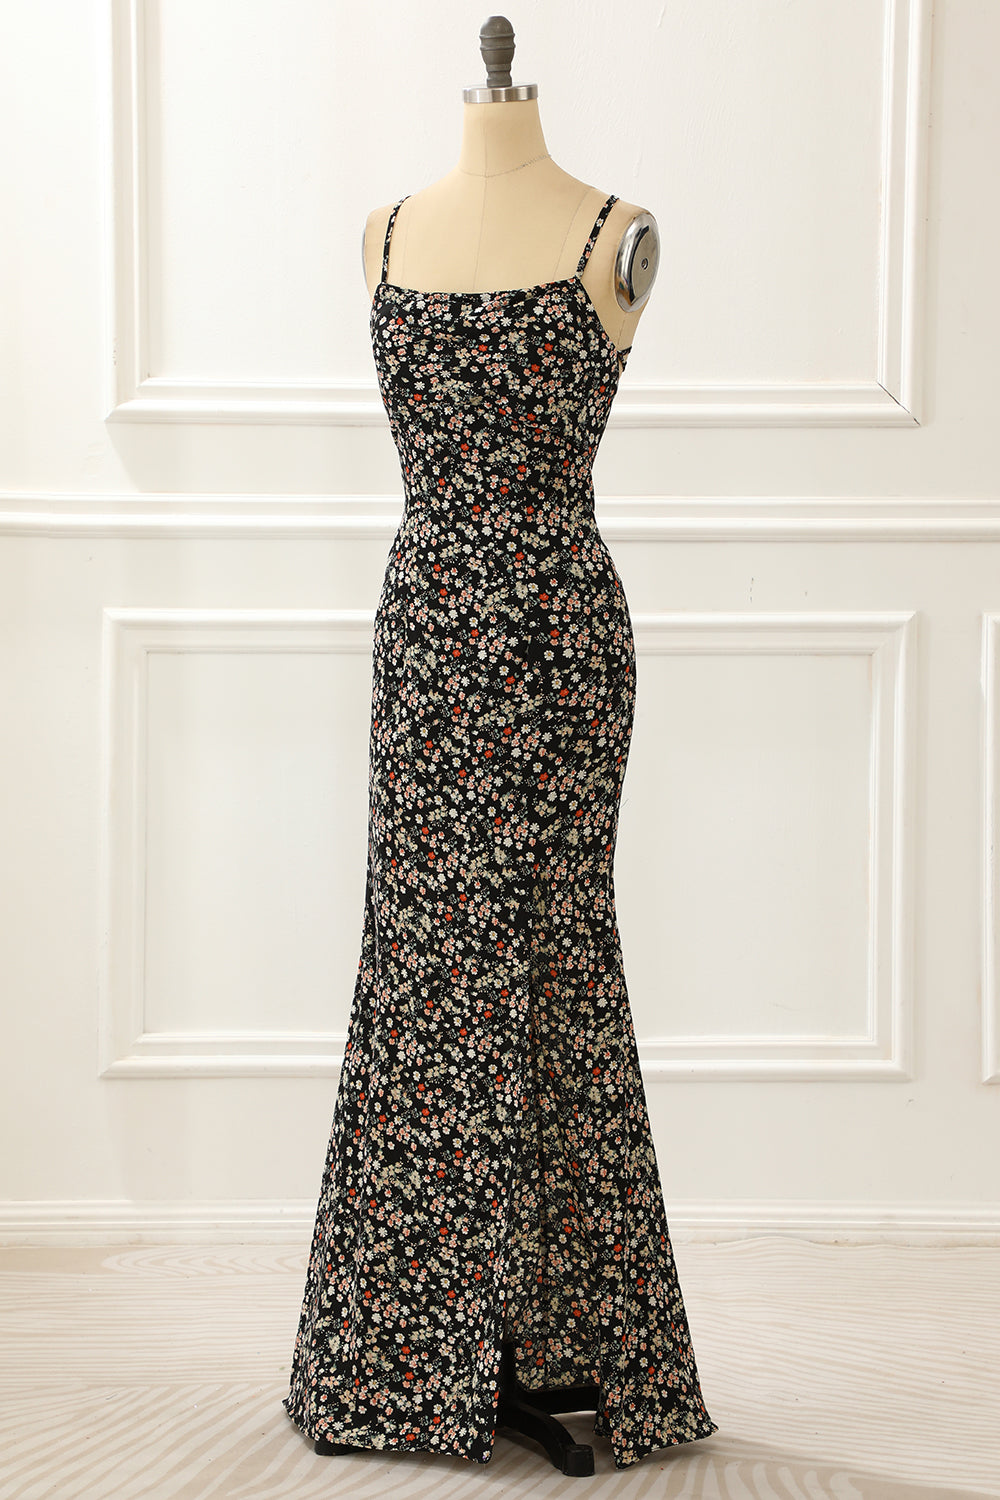 Formal Dress For Girls, Black Spaghetti Straps Simple Prom Dress with Floral Print